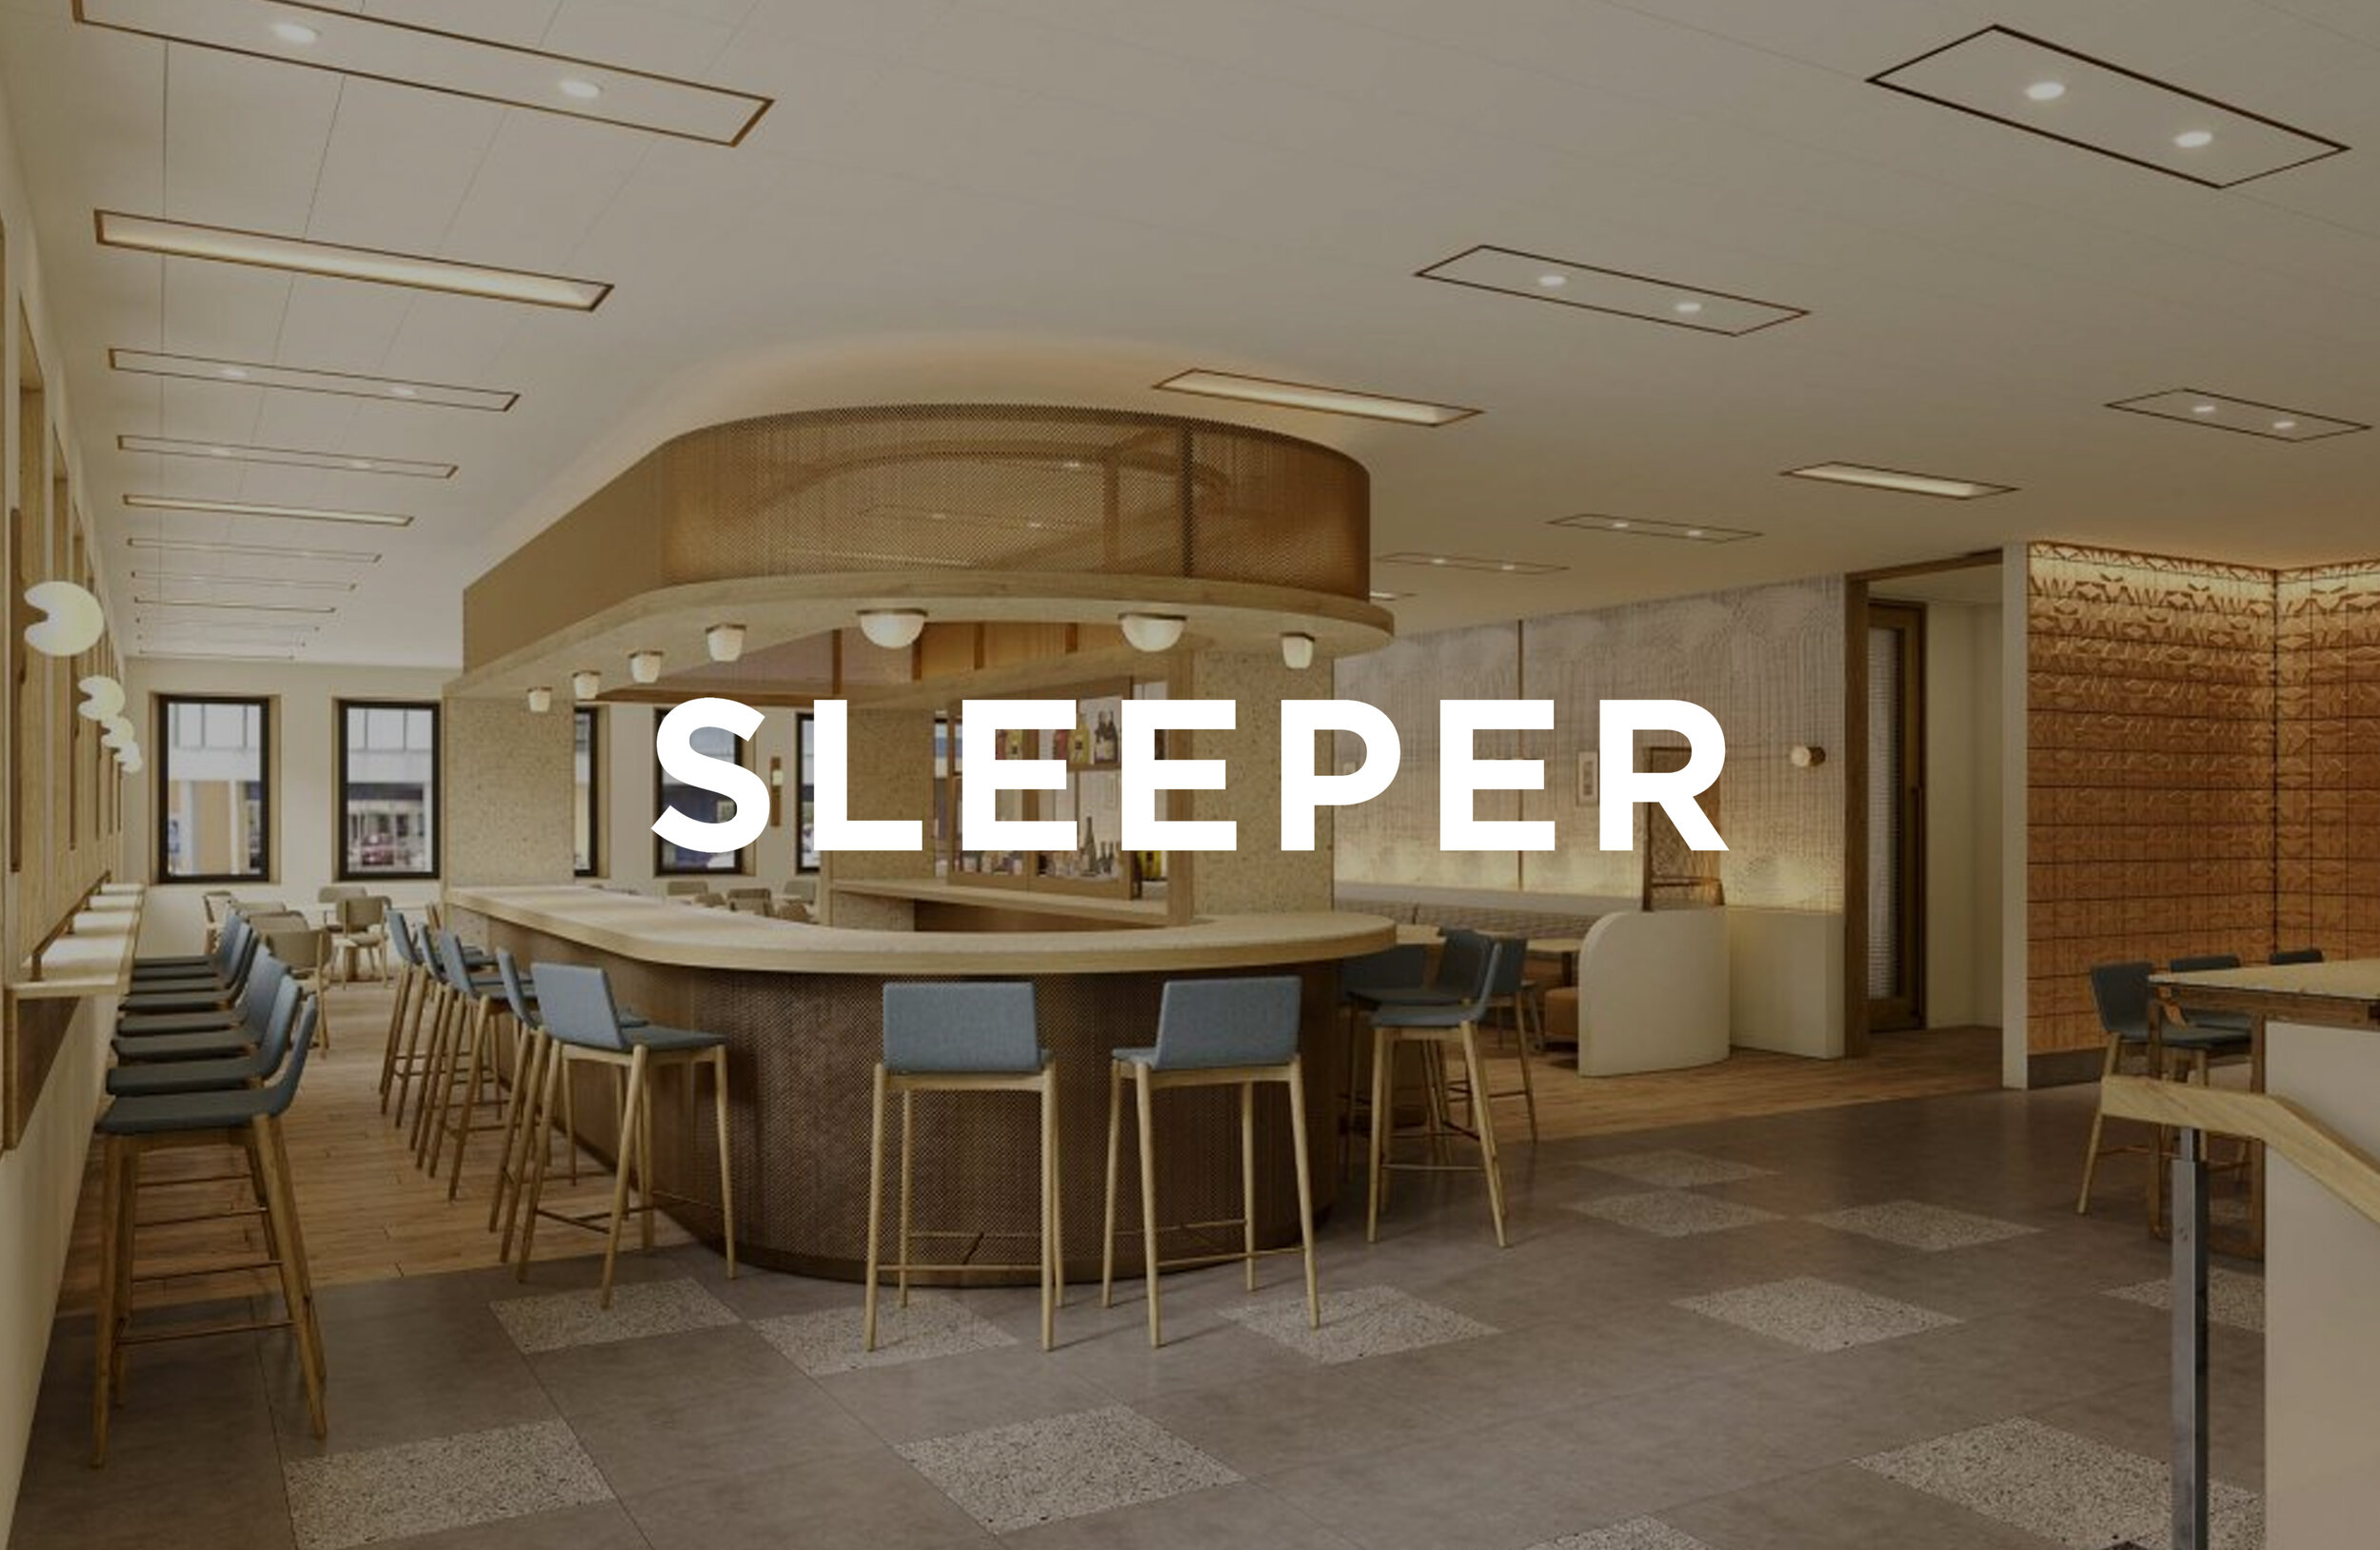 Sleeper: First Net-zero Emissions Hotel in the US